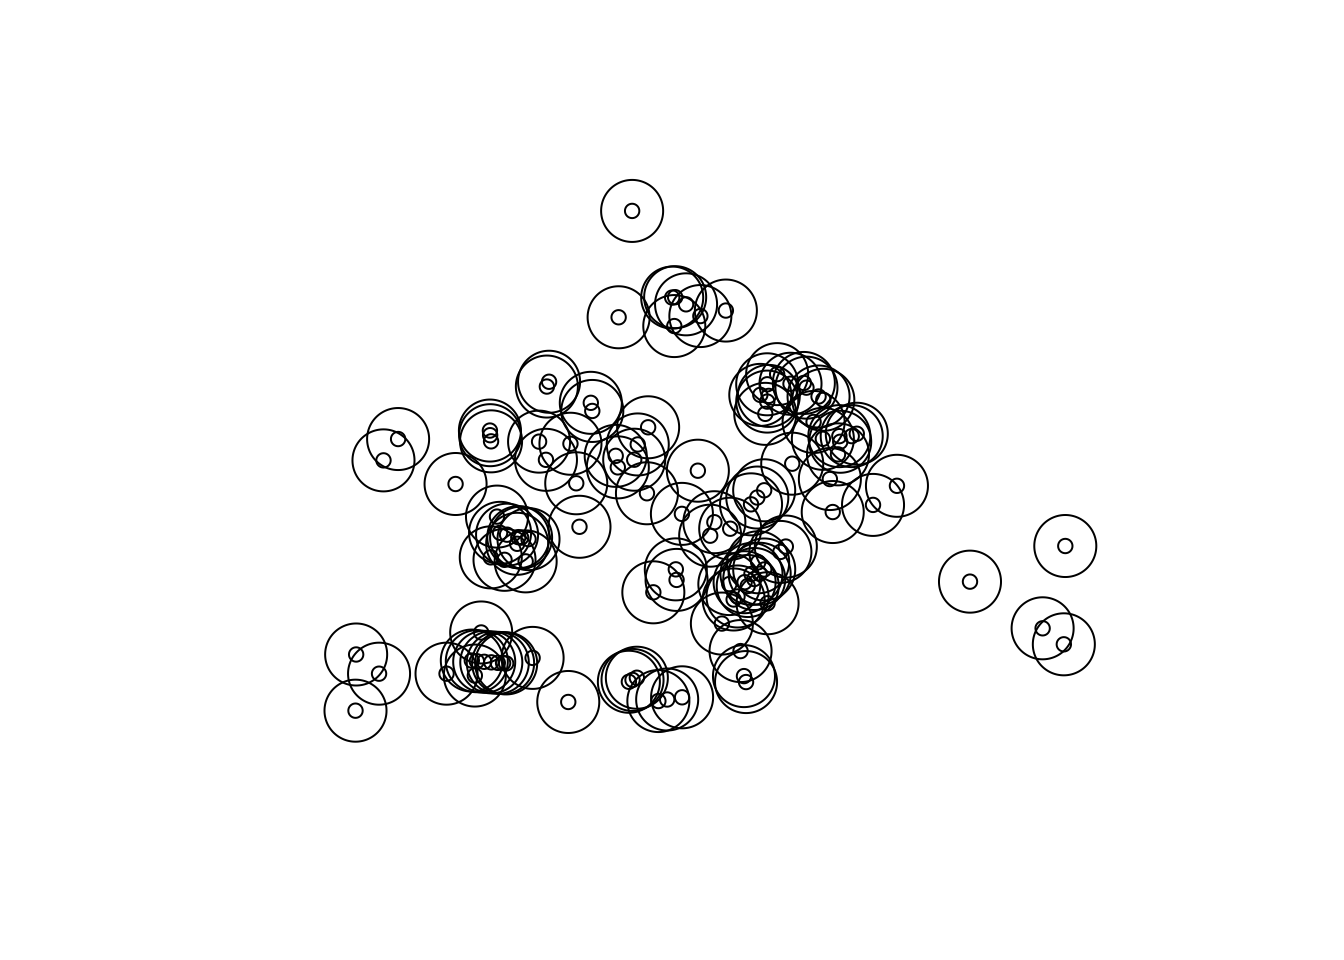 Small black circles are now the centrepoints for medium black circles. Compared to the previous figure, they are easier to discern, and concentrations are easier to place.